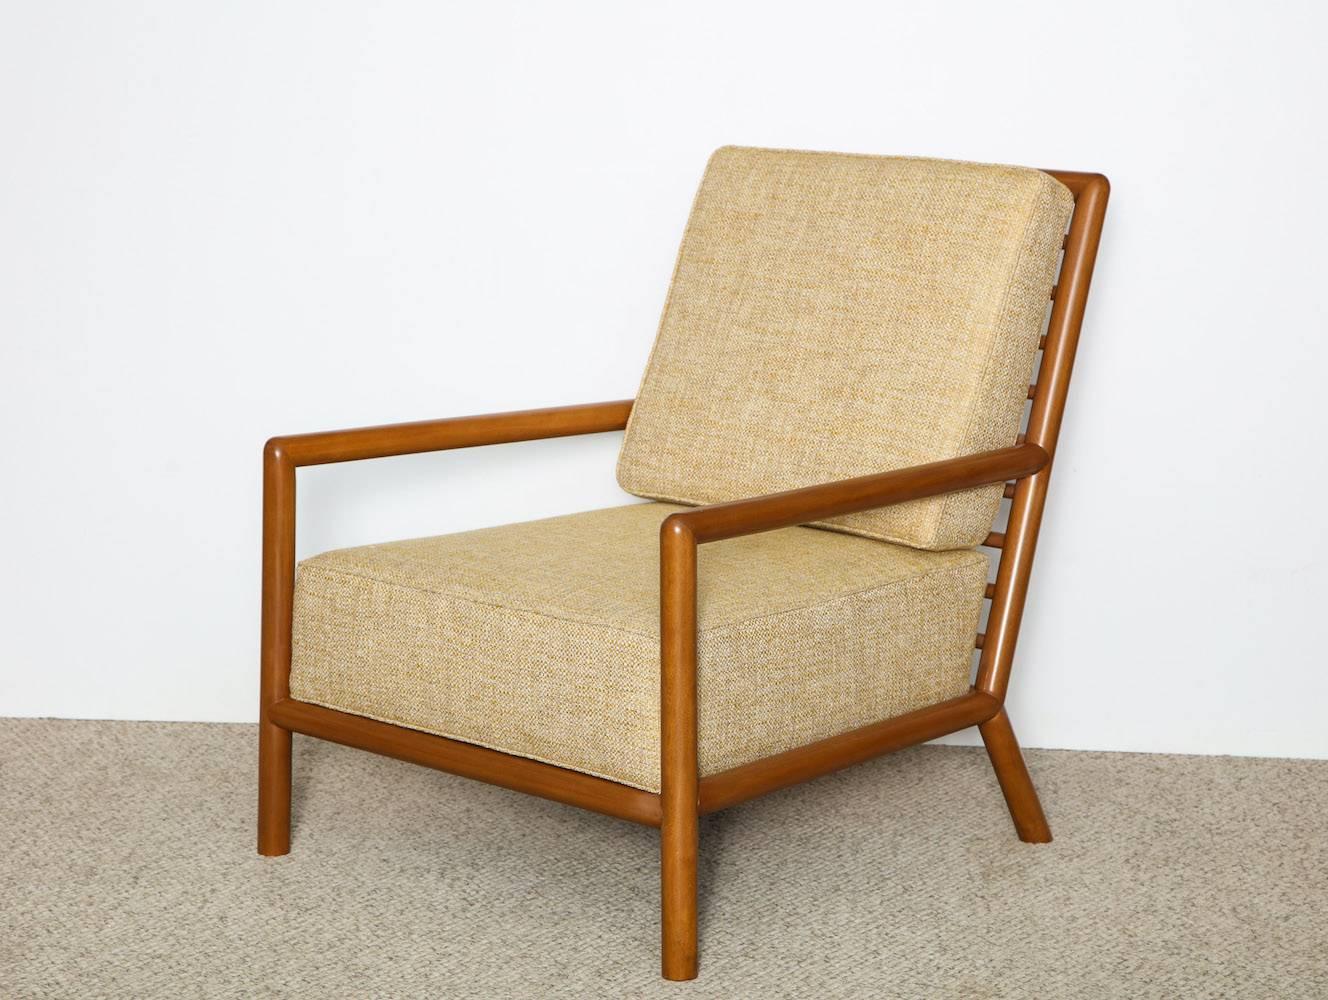 Rare chair #1684 by T.H. Robsjohn-Gibbings for Widdicomb Furniture Co.
Great open-arm lounge chair made of solid wood dowels, with mitered joints. Attached box seat cushion and loose back cushion. Excellent condition, wood has recently beed